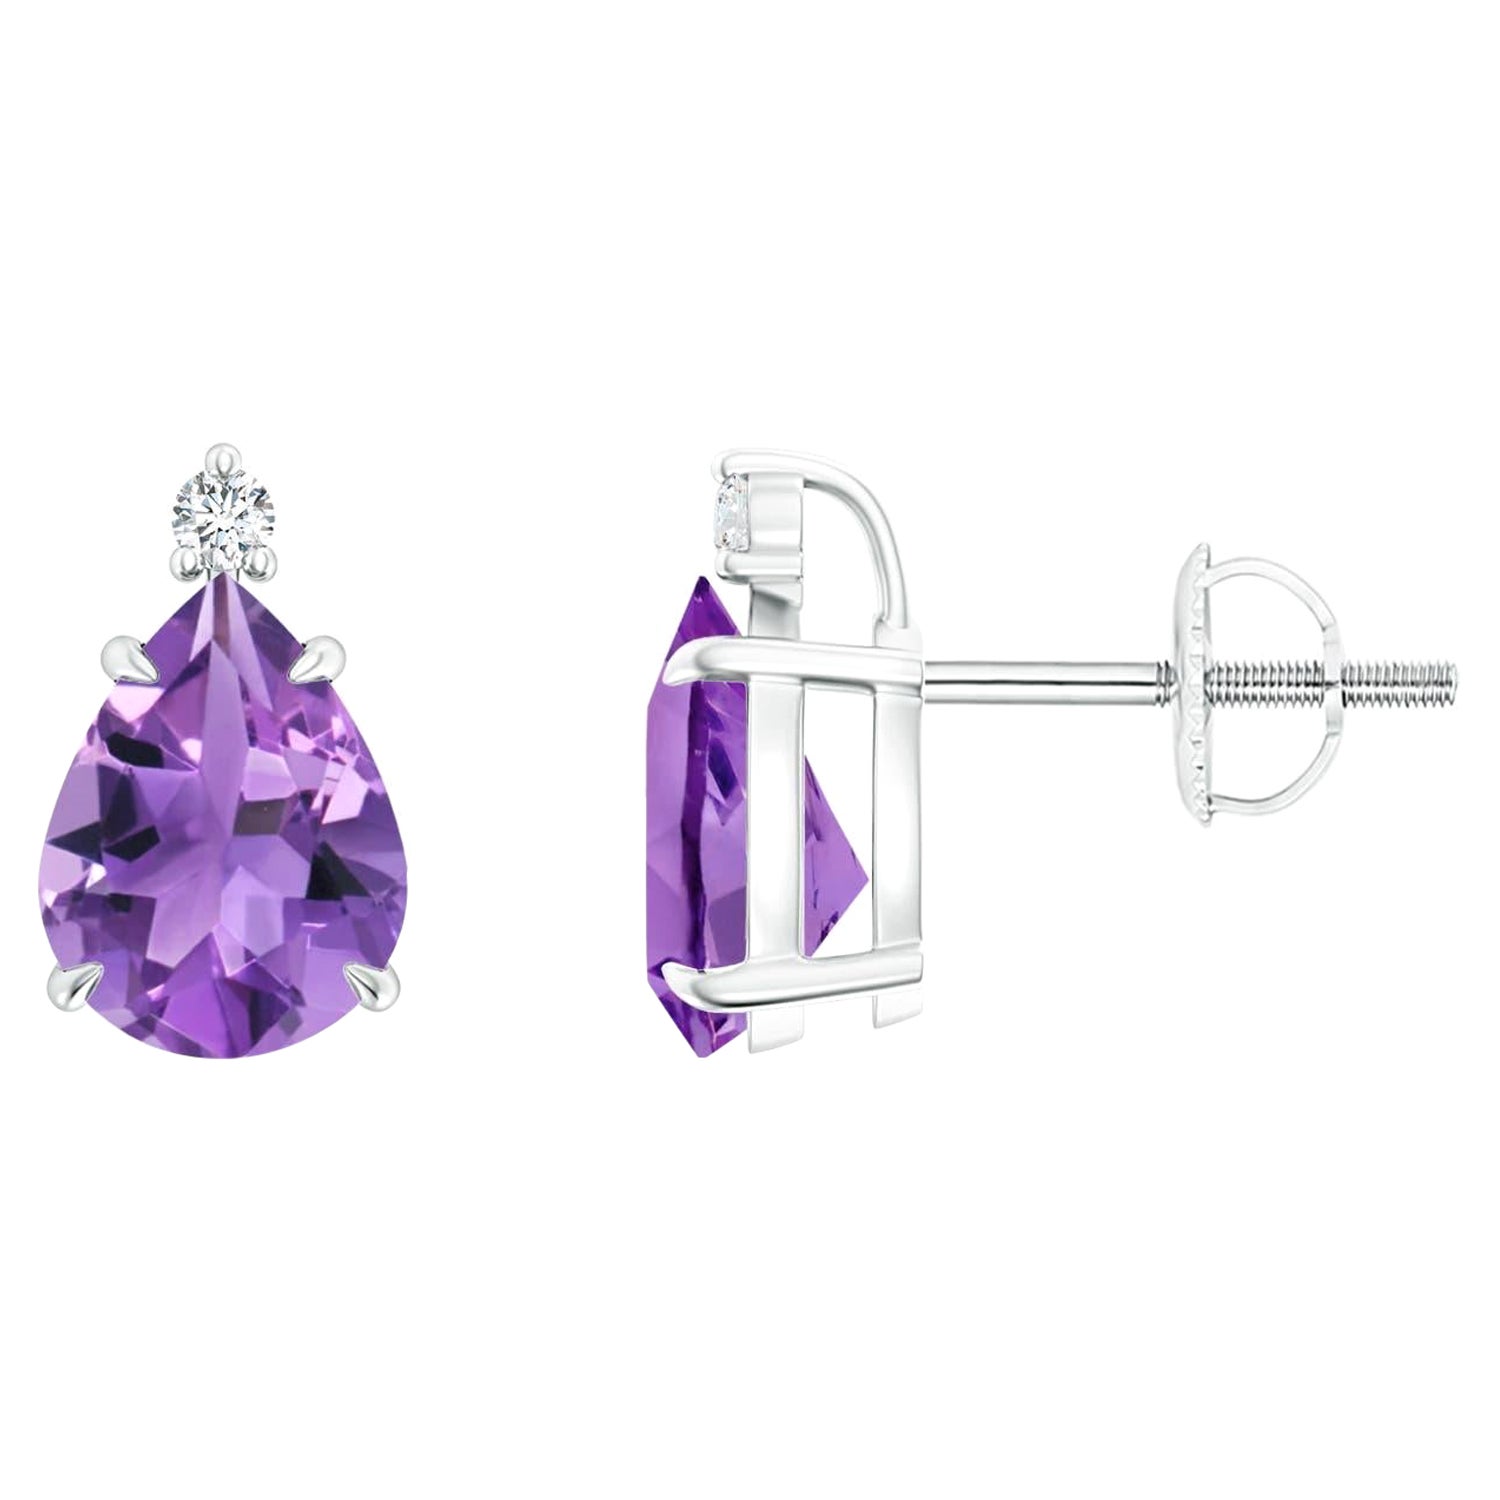 Natural Claw-Set Pear 2ct Amethyst Solitaire Earrings in 14K White Gold For Sale